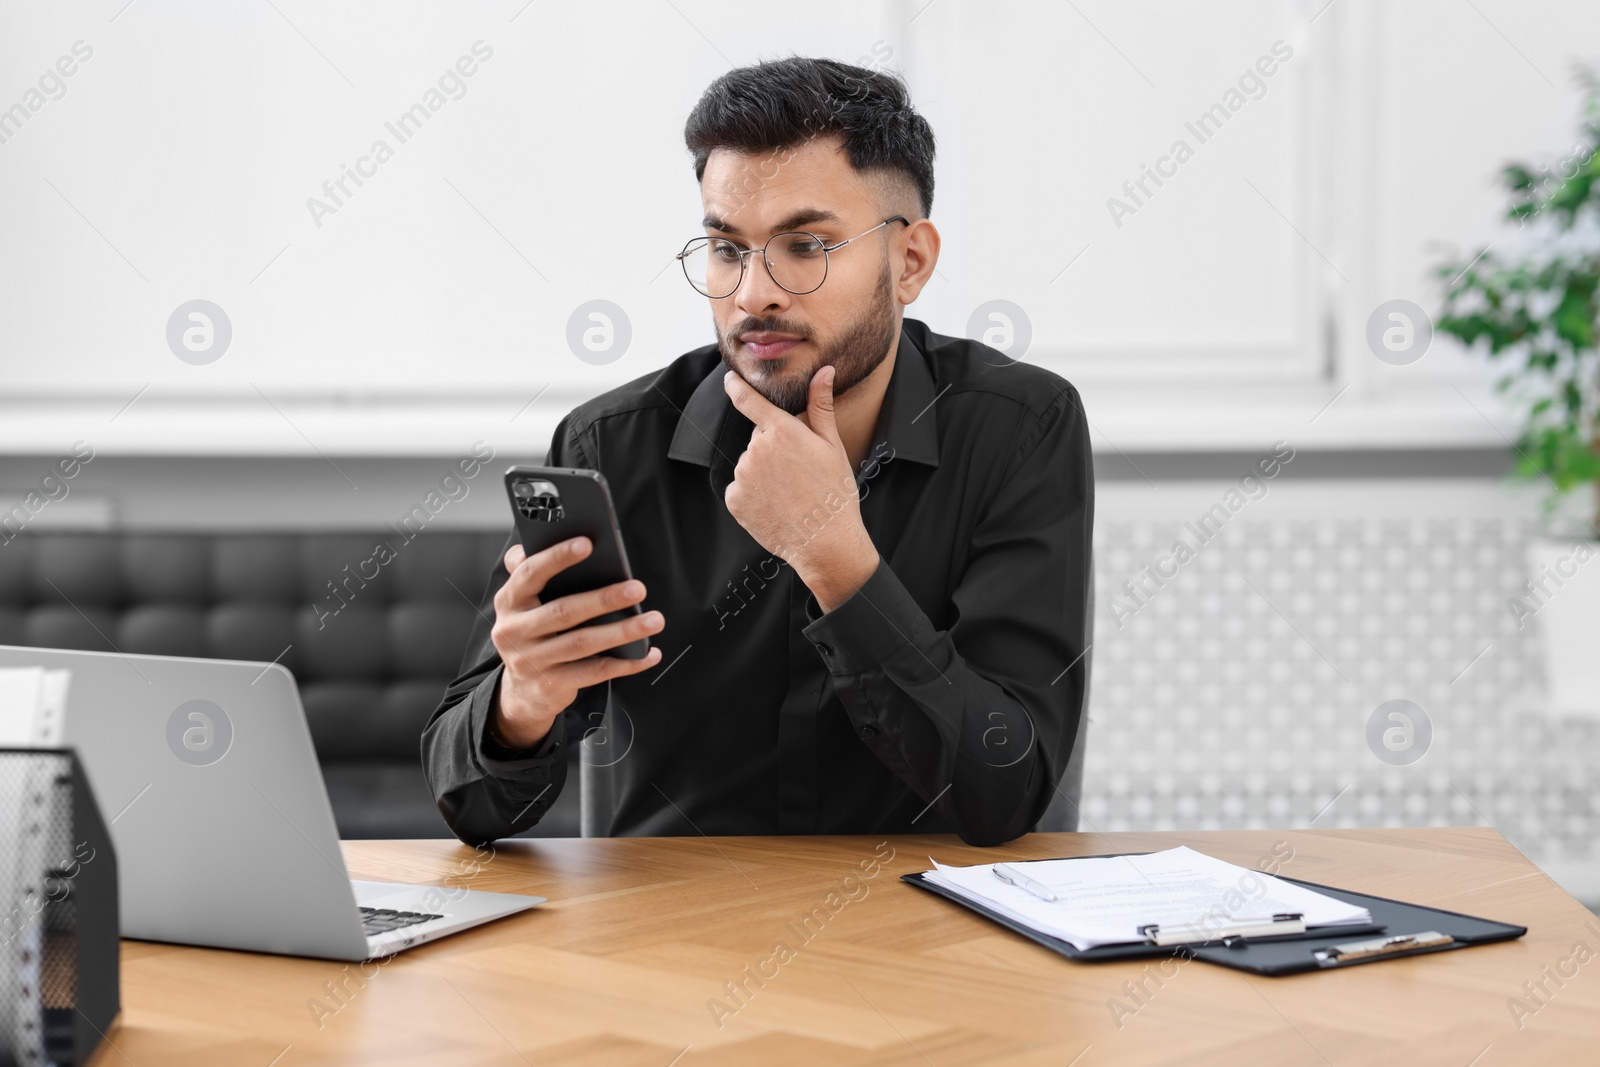 Photo of Handsome young man using smartphone at wooden table in office